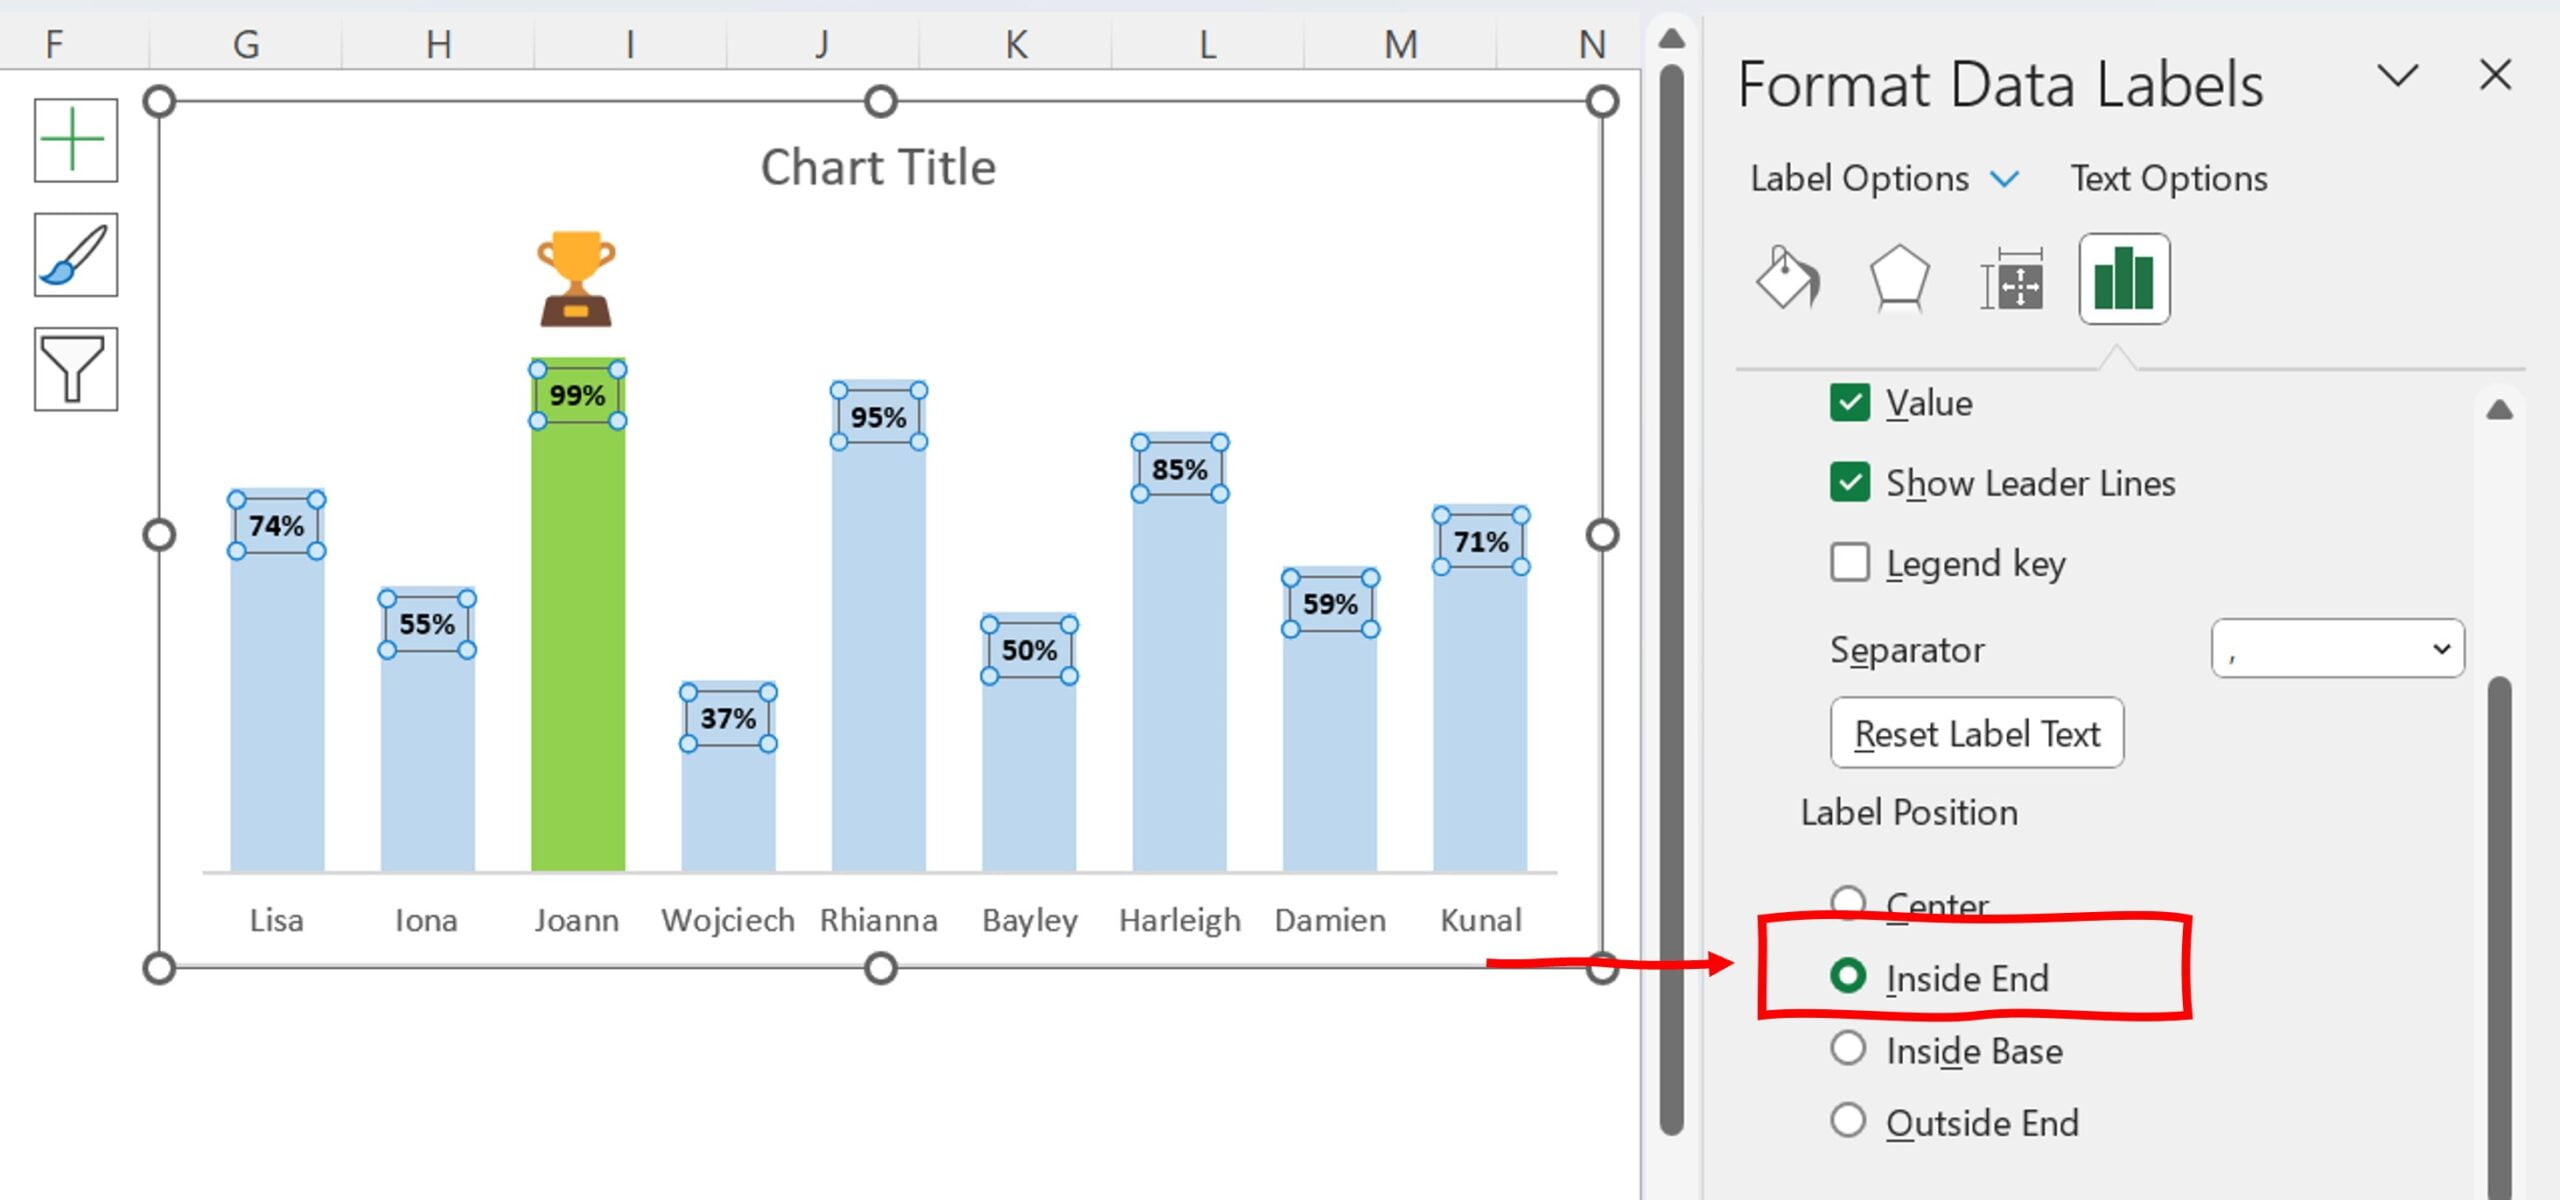 Add Data Labels for other students